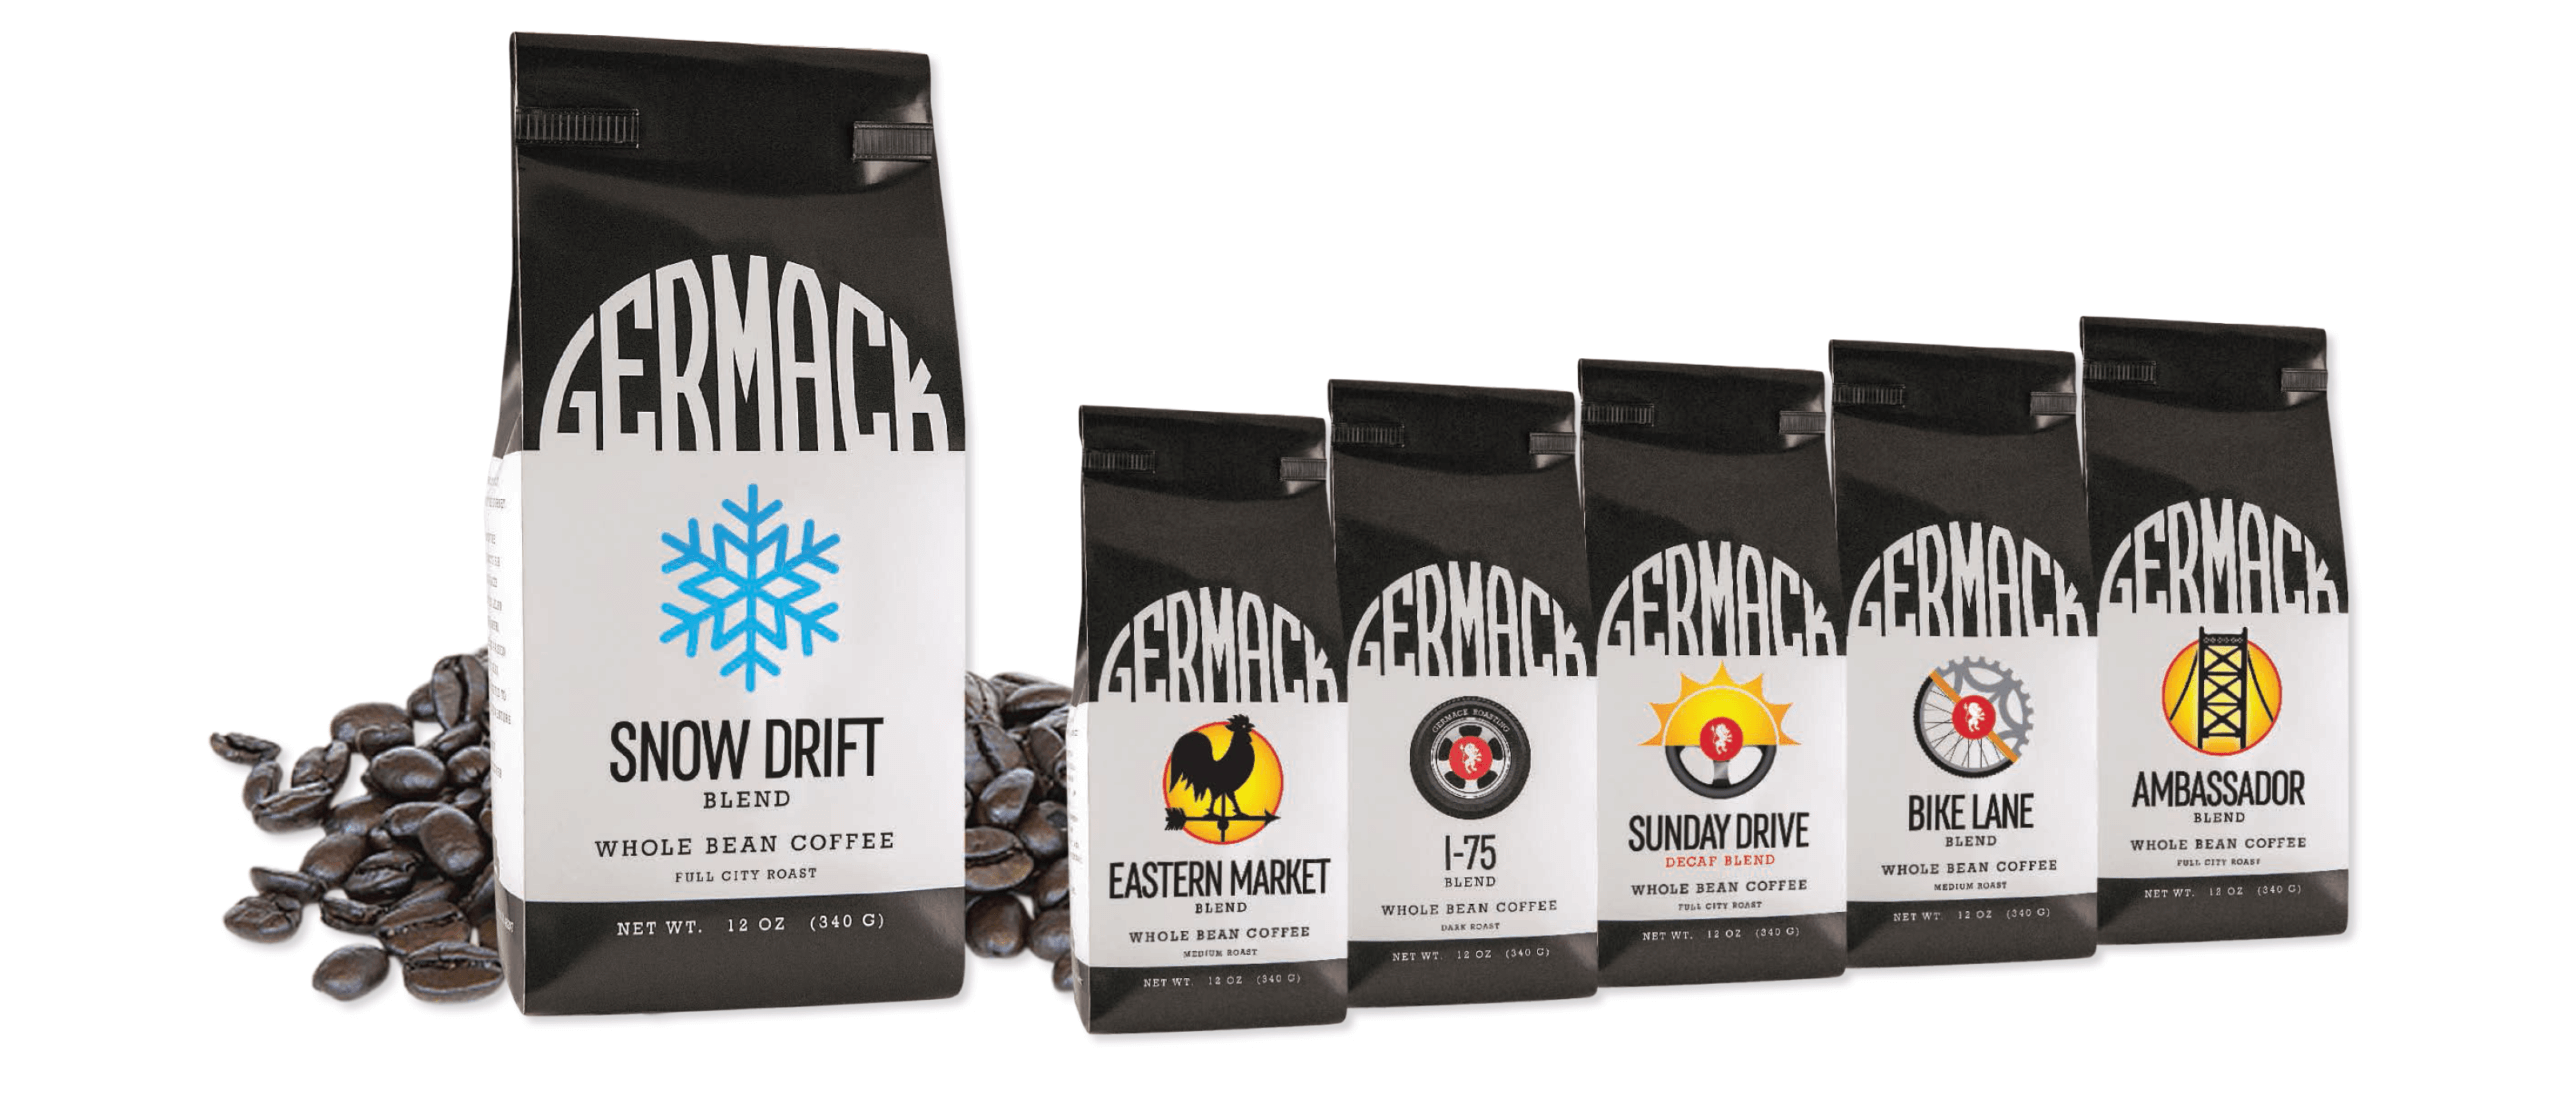 Germack Coffee brand packaging entire line of flavored blends